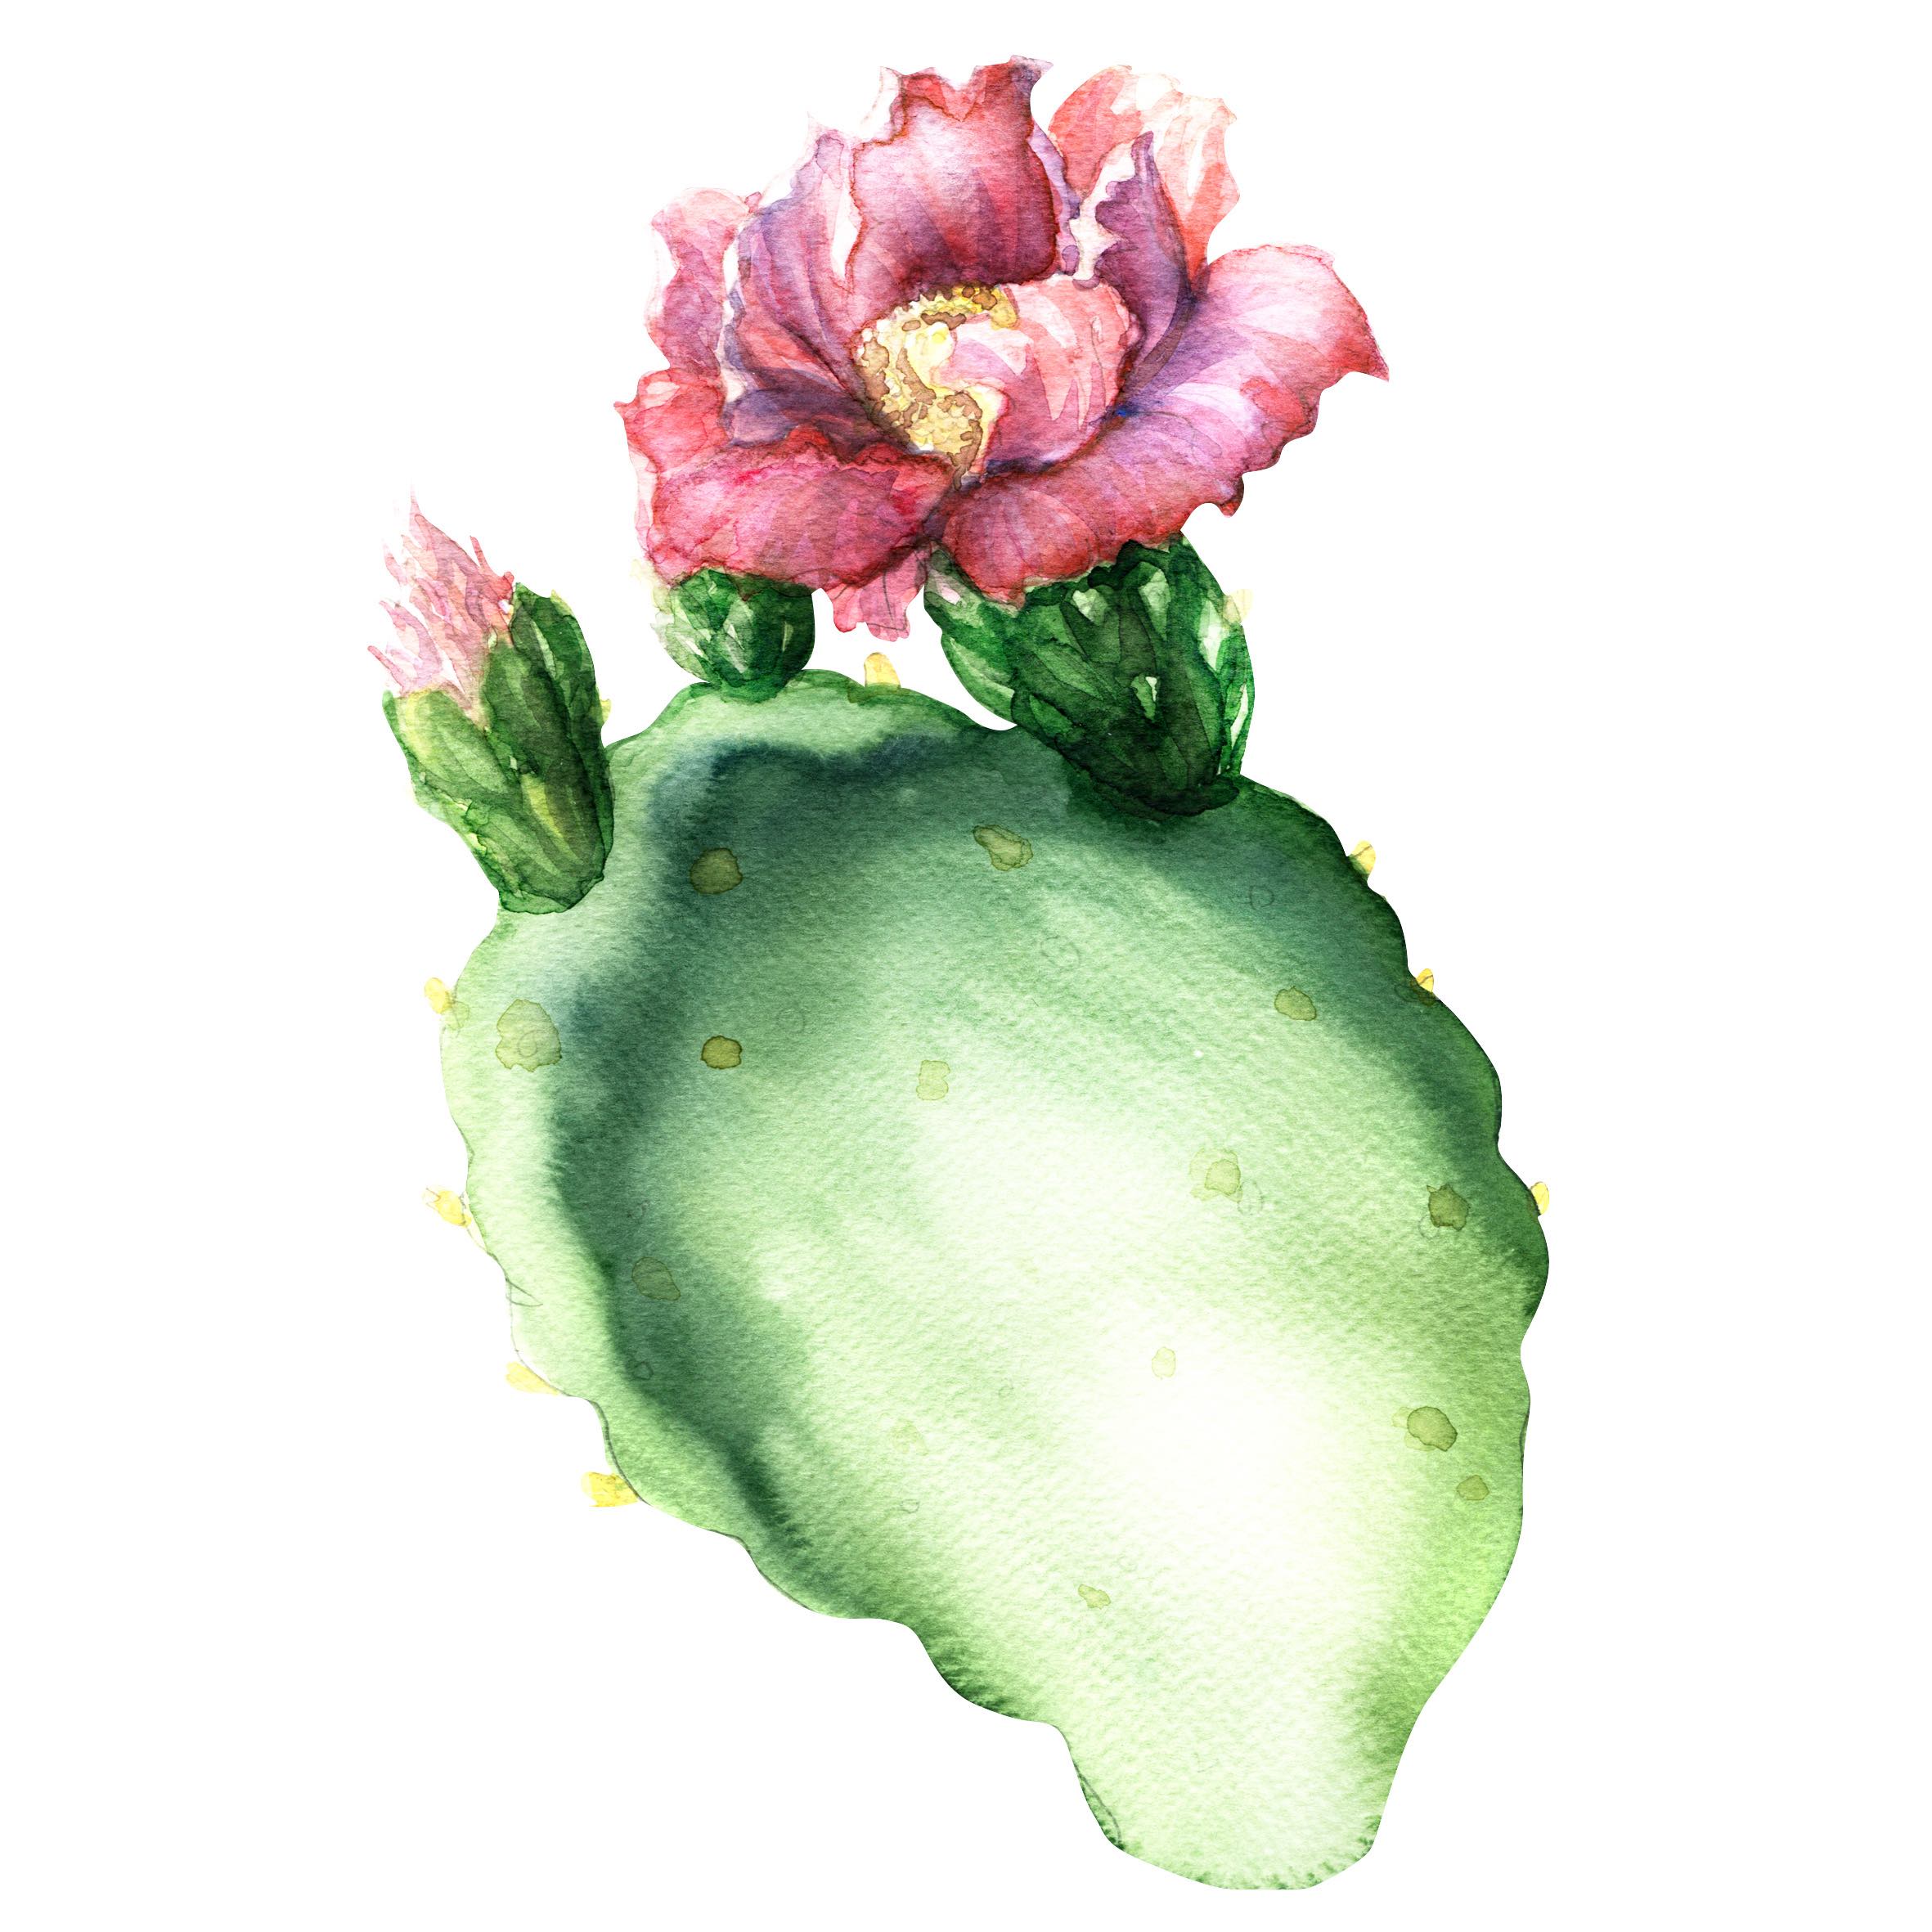 Opuntia cactus with flower isolated, watercolor painting